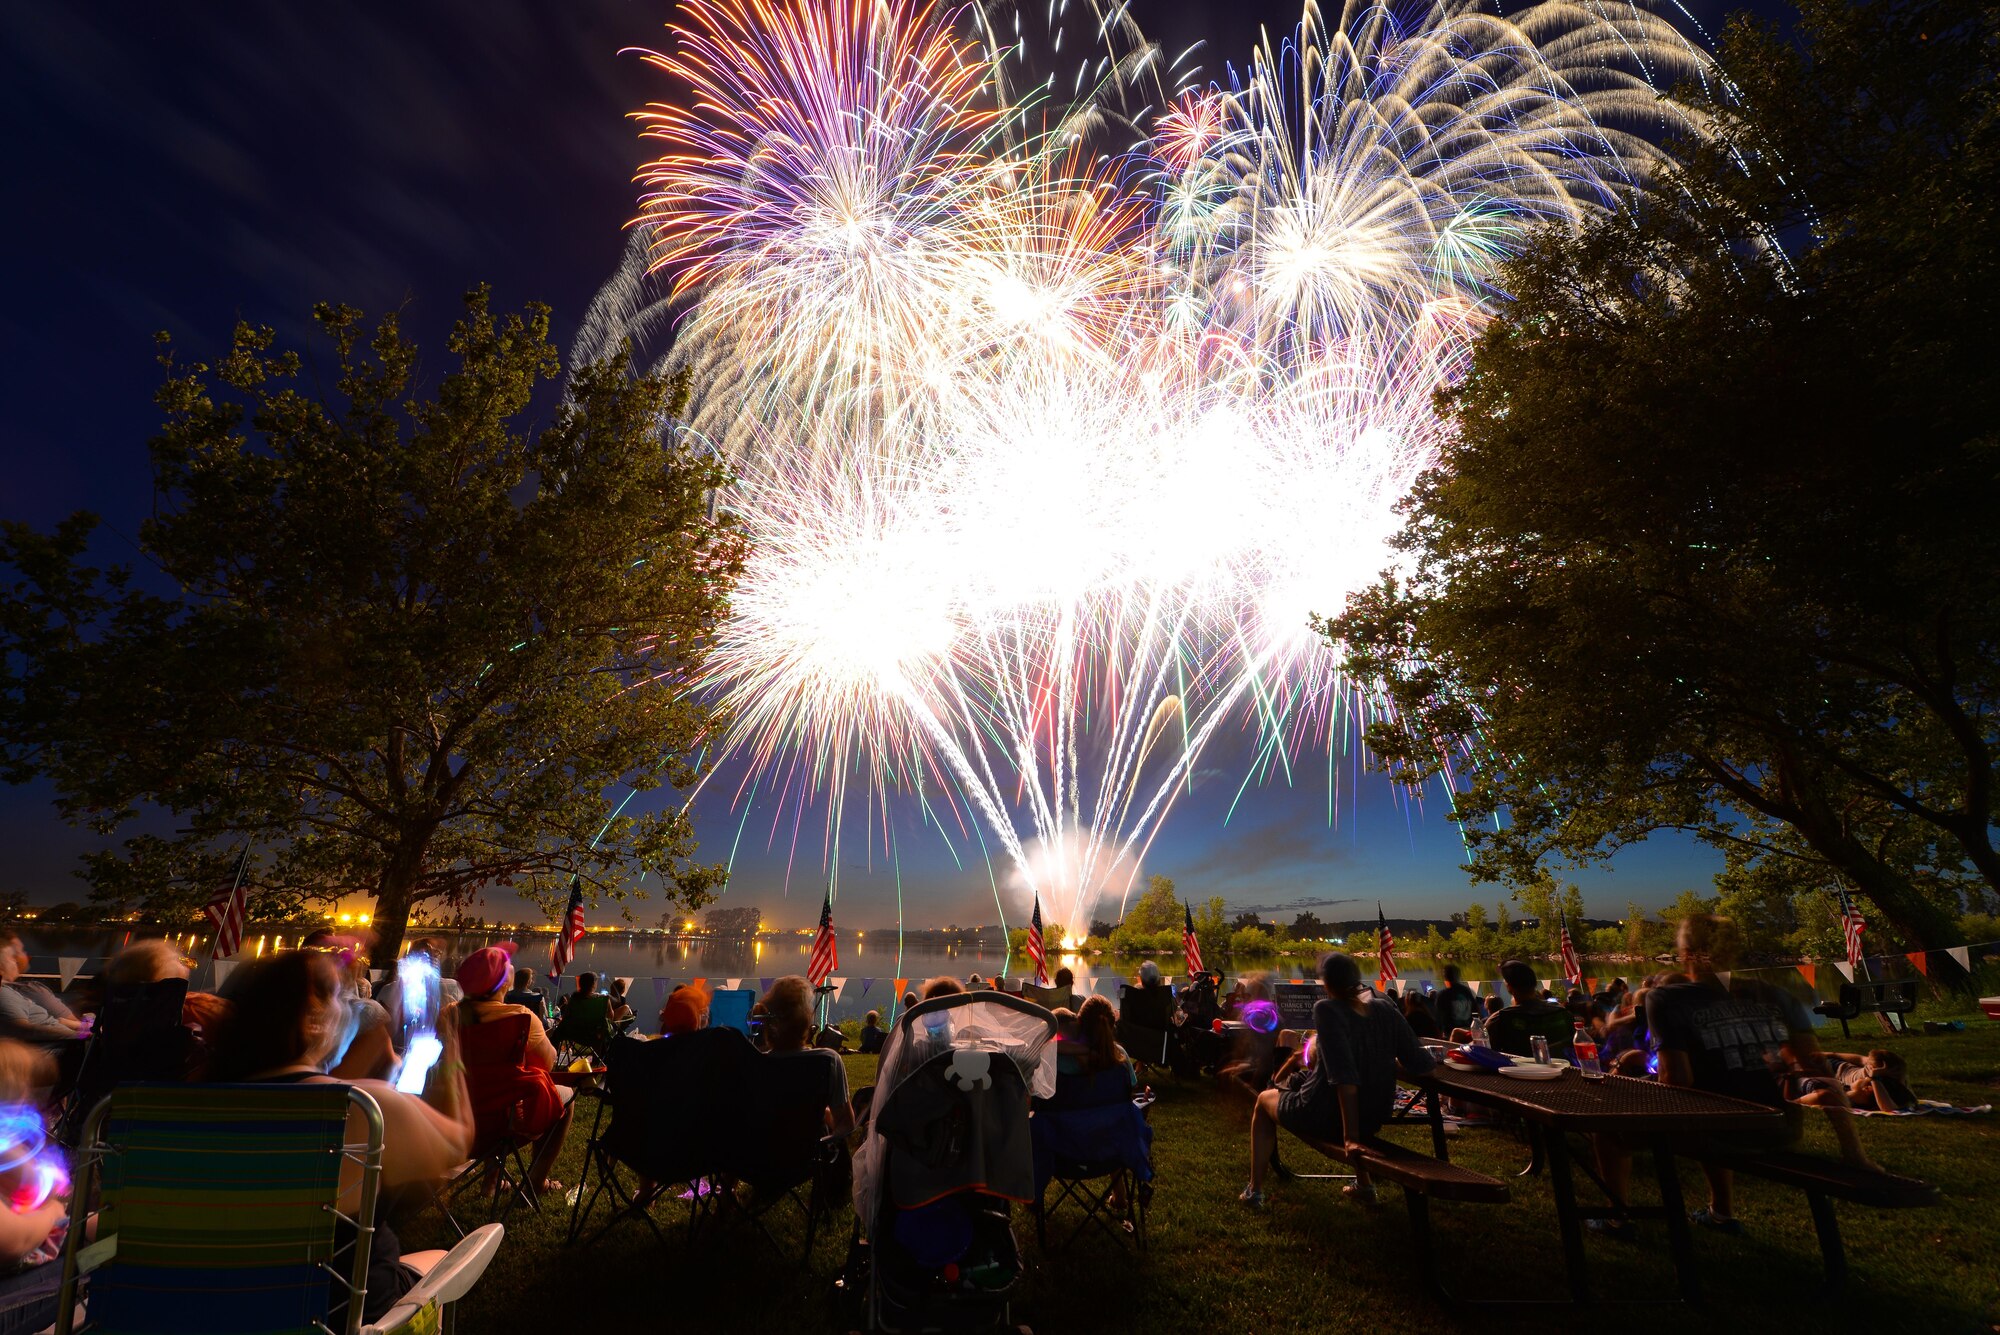 Fireworks fill the sky on July 8, 2017 at Offutt’s base lake during the annual fireworks display. Several family activities took place at the celebration including face painting, treasure hunt and a performance from the Heartland of America Band. (U.S. Air Force photo by Zachary Hada)